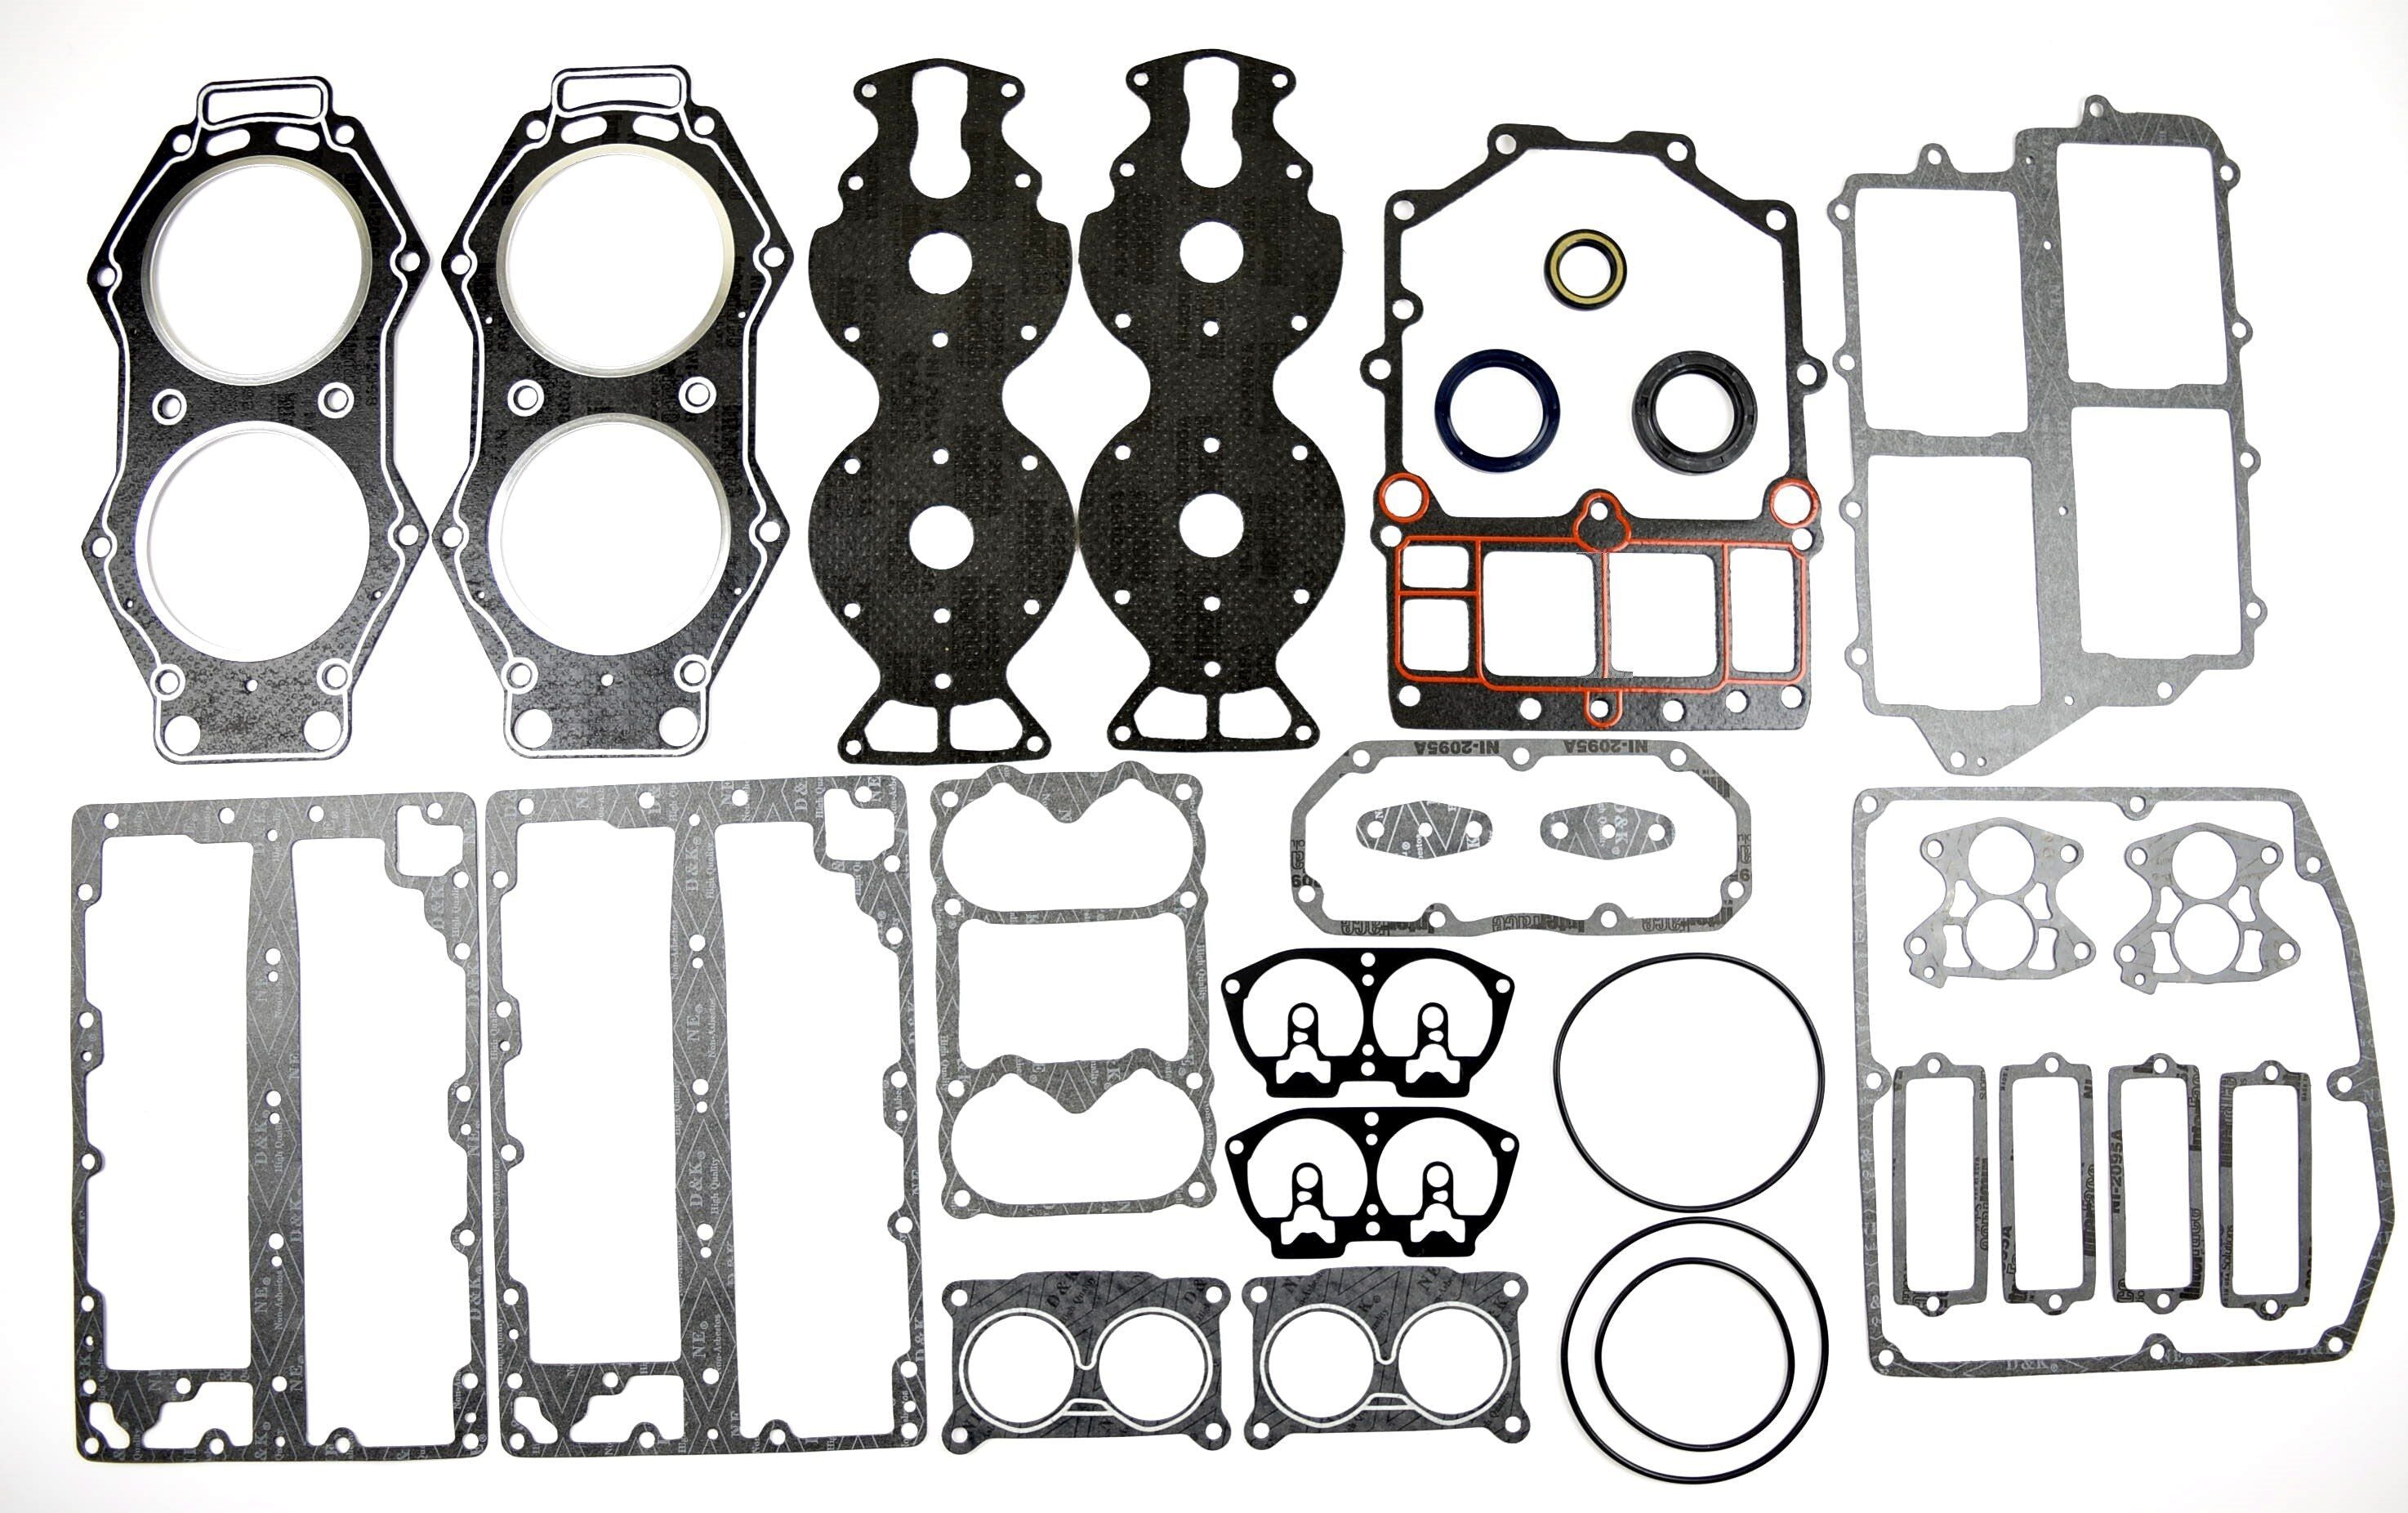 Oversee Marine 6E5-W0001; 6E5-W0001-01; 6E5-W0001-A2; 6F3-W0001 Power Head Gasket Kit Replacement For Yamaha V4 100-130HP 2 Stroke Outboard Engine Top Real